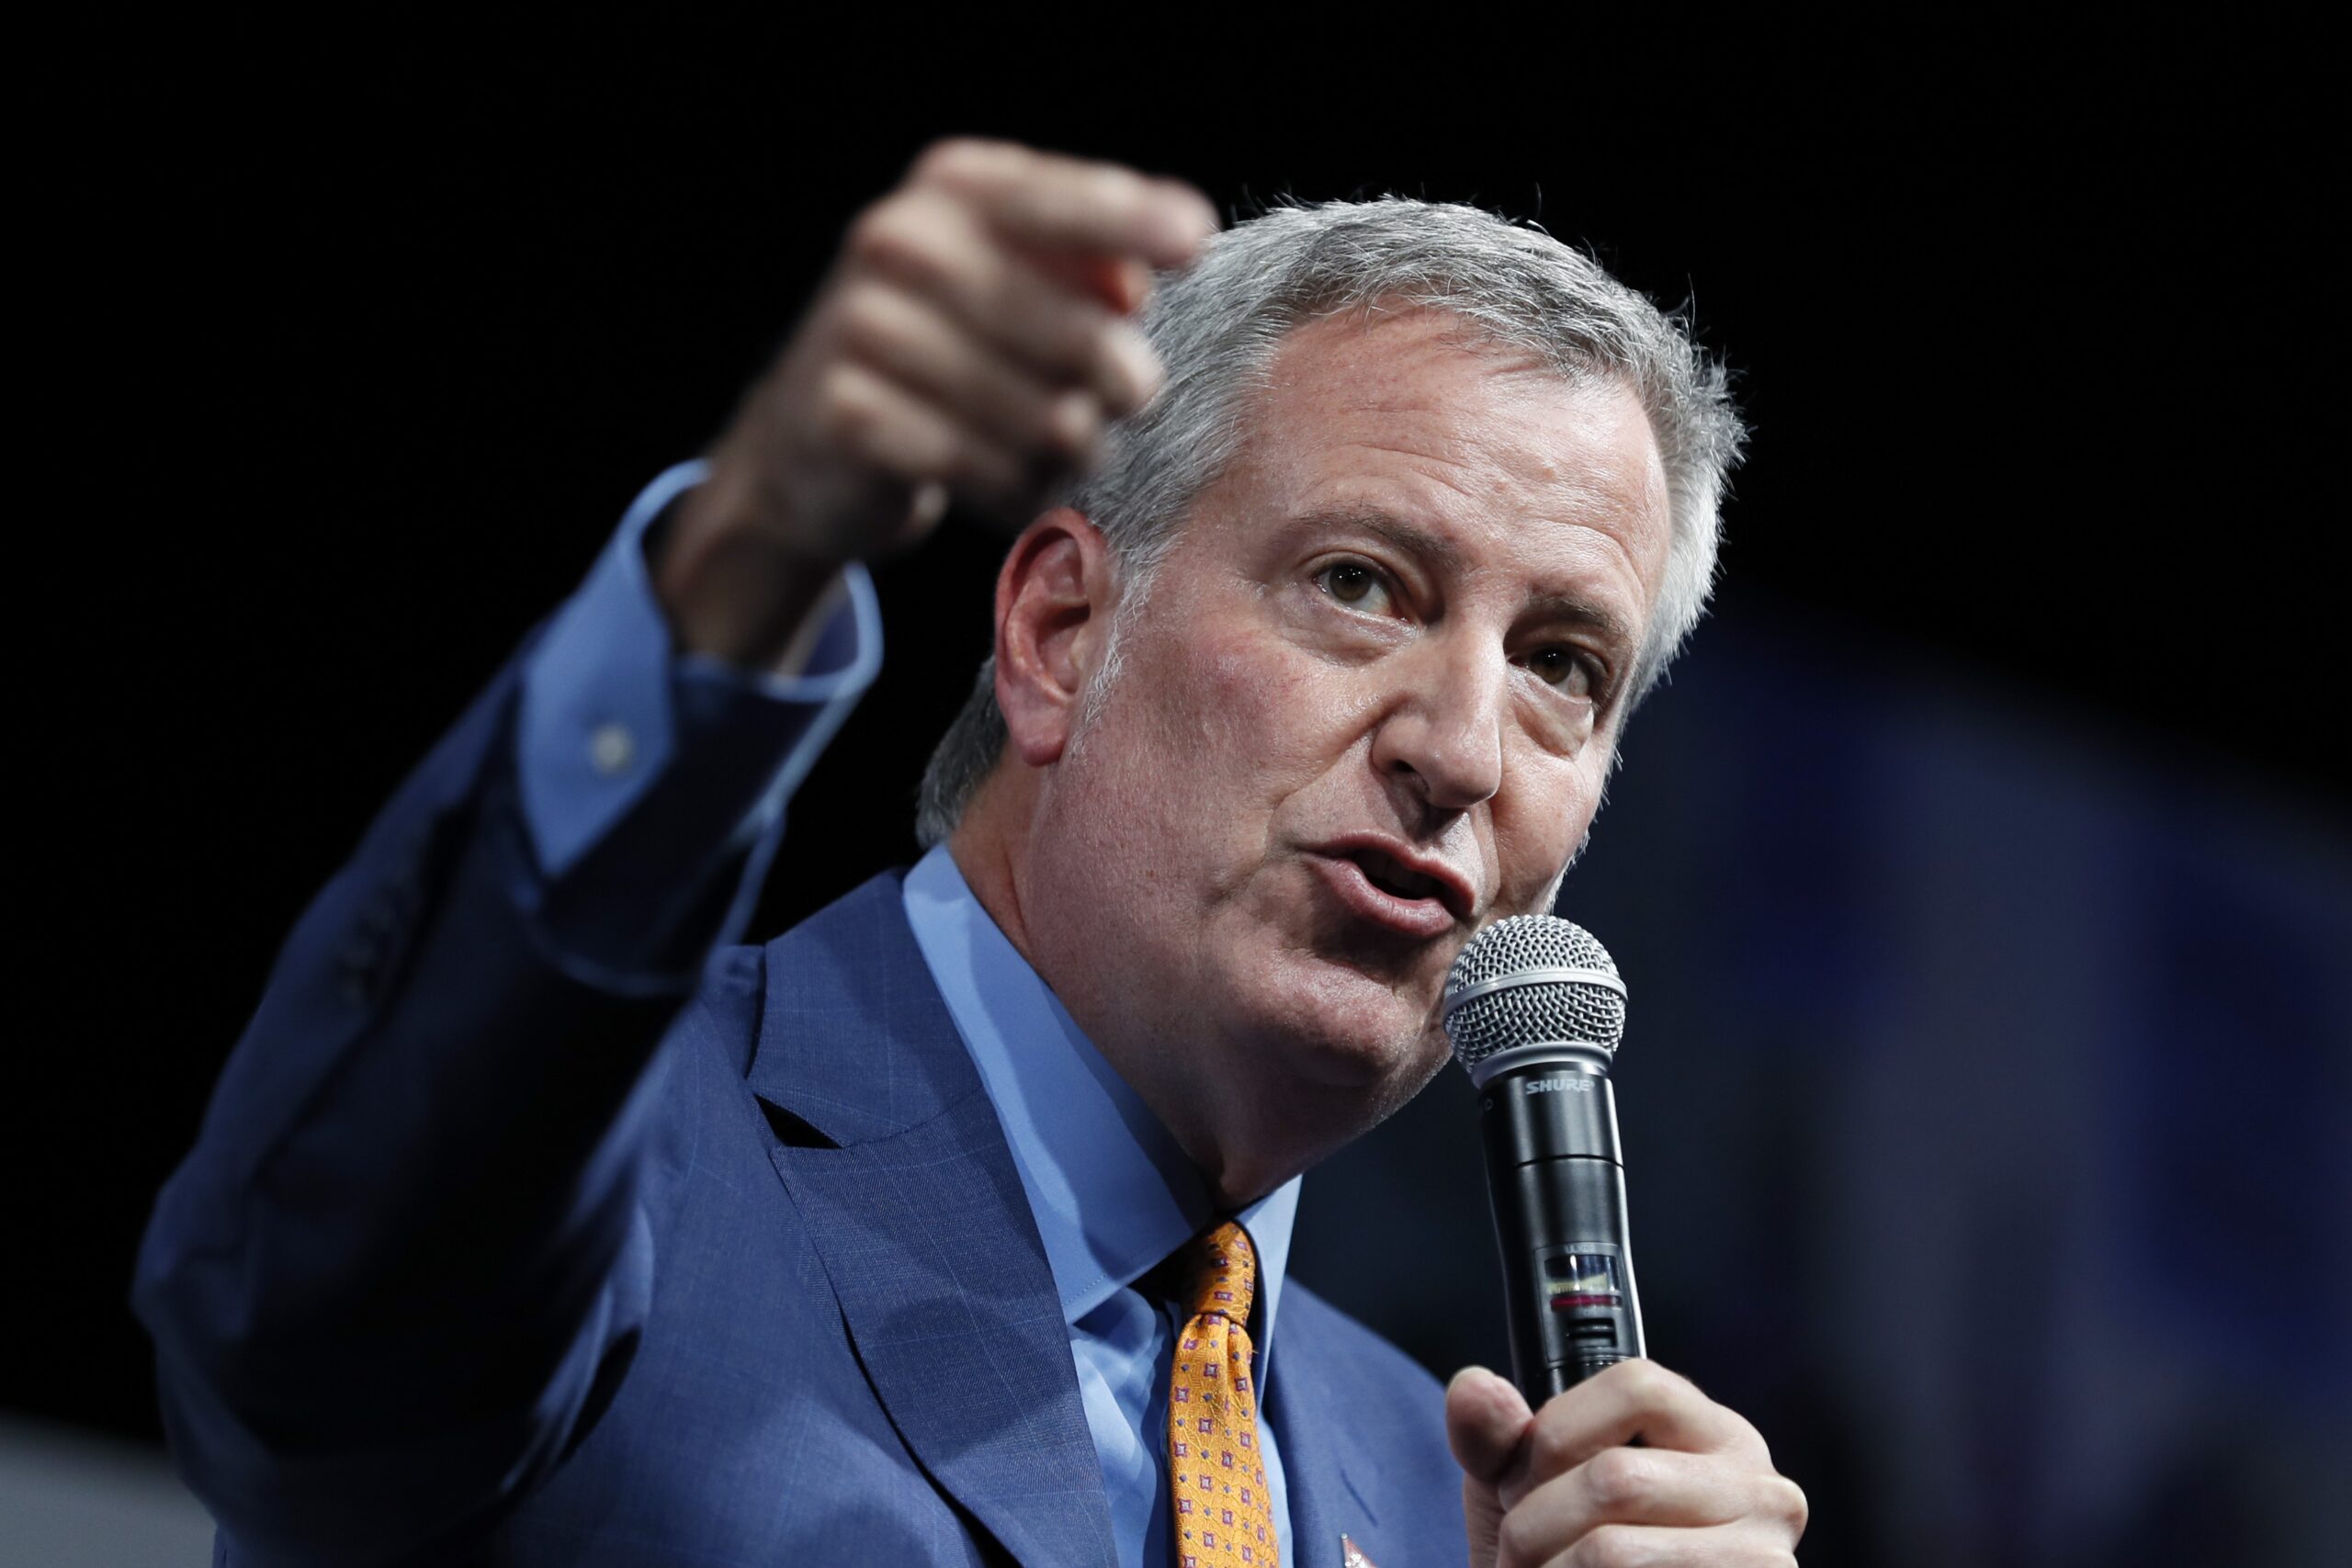 Man Finds Out His Wife is Hooking Up With Bill DeBlasio When NY Post Calls Him For Comment